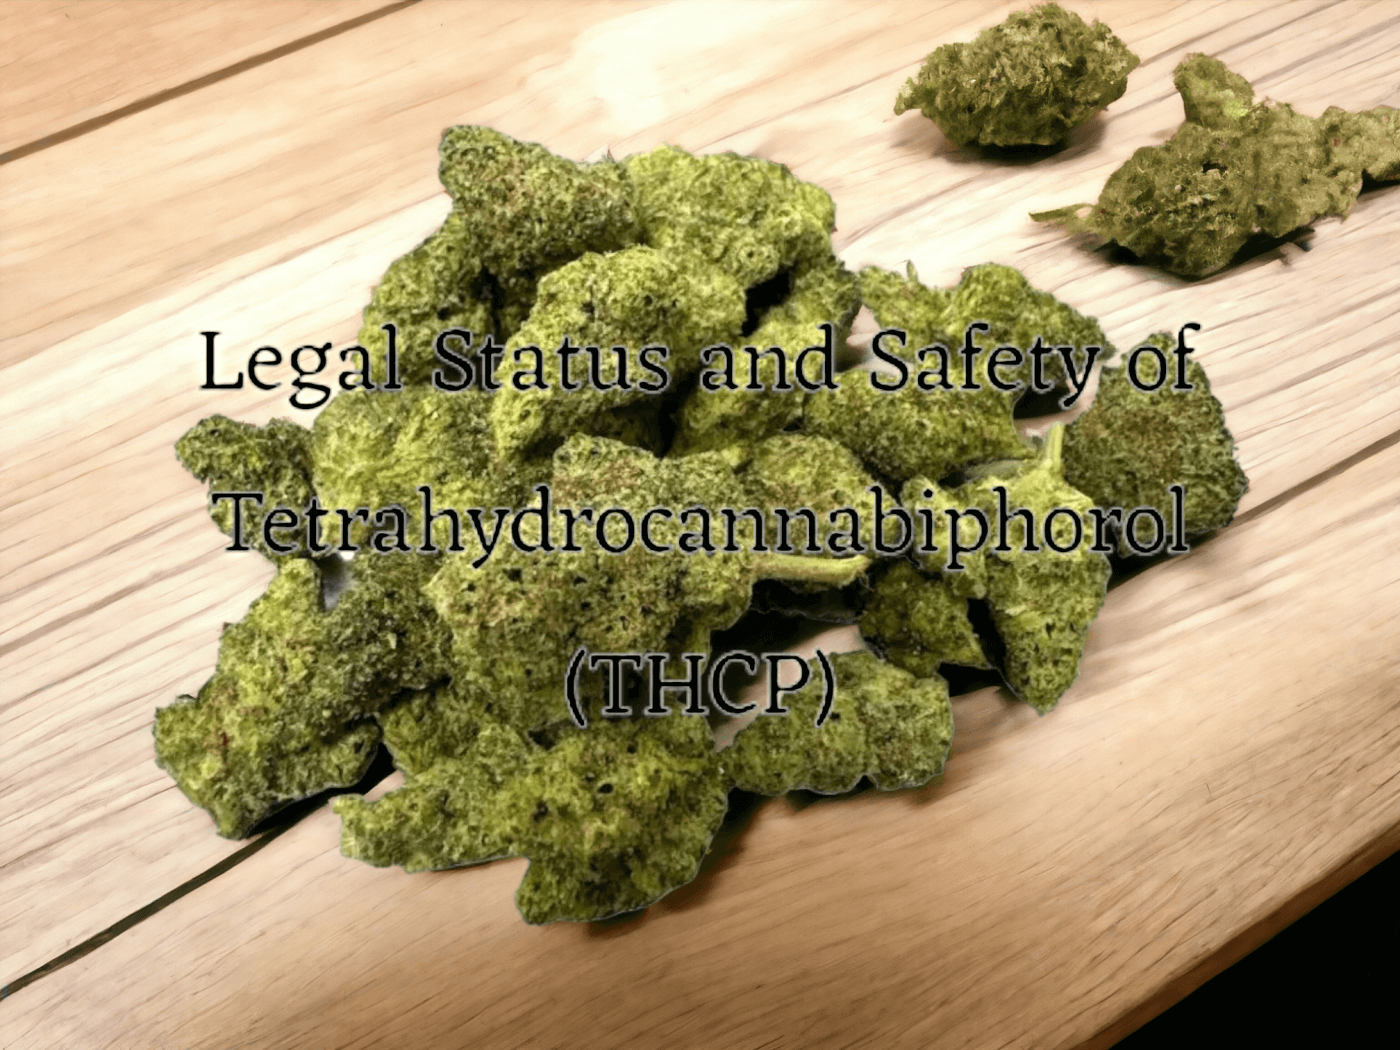 Decoding the Legality and Safety of Tetrahydrocannabiphorol (THCP)